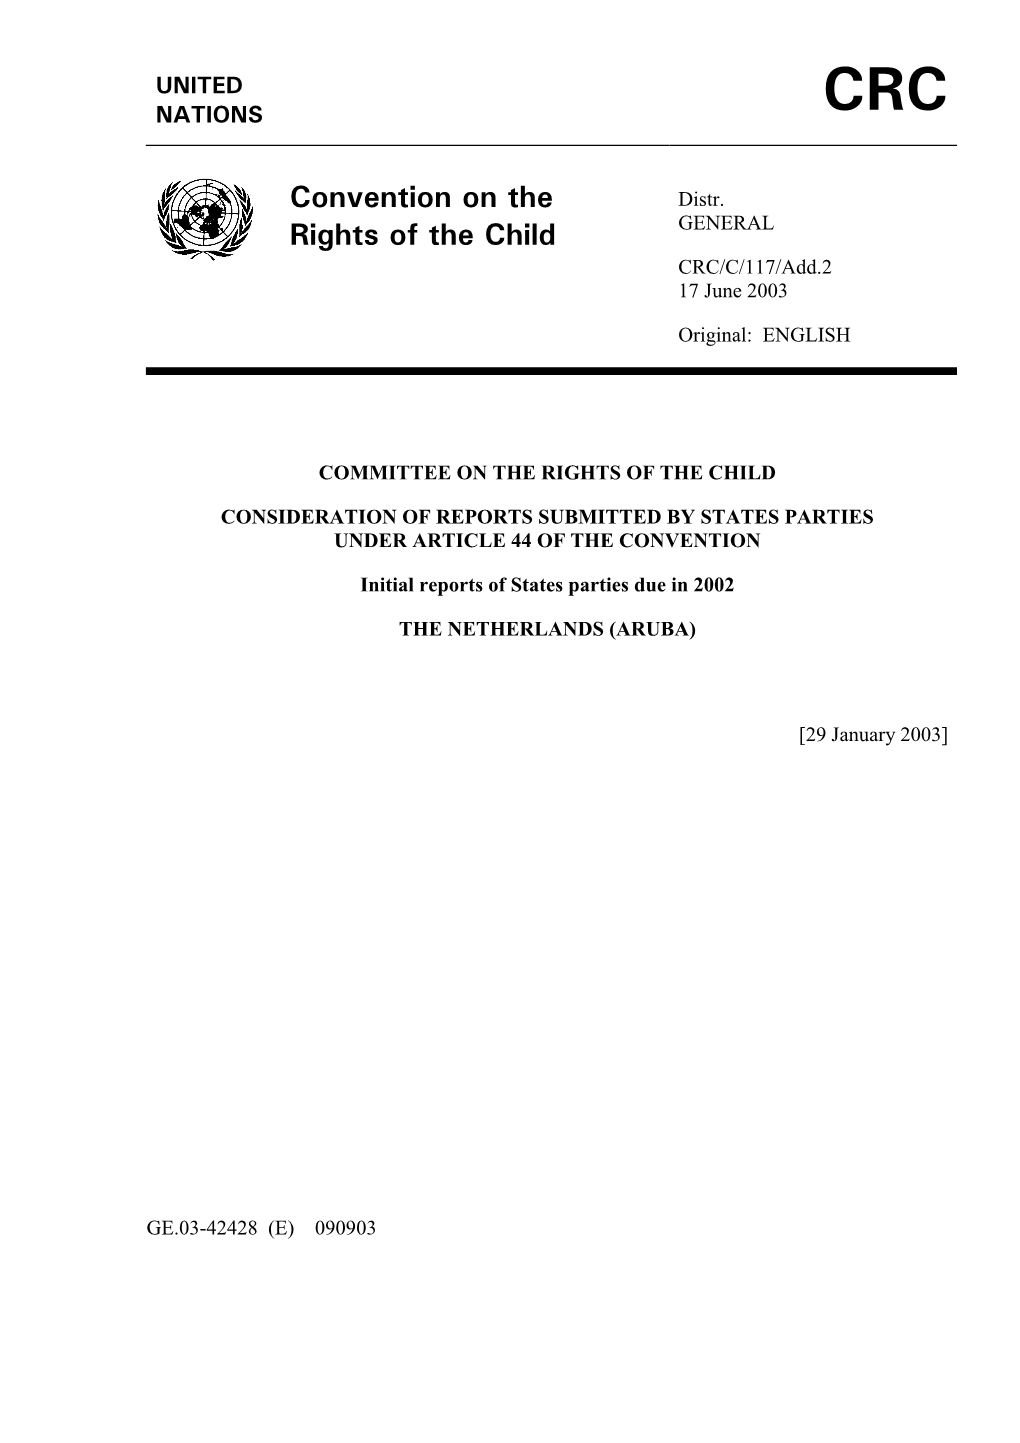 Convention on the Rights of the Child, Which Entered Into Force for the Kingdom of the Netherlands in Respect of Aruba on 17 January 2001